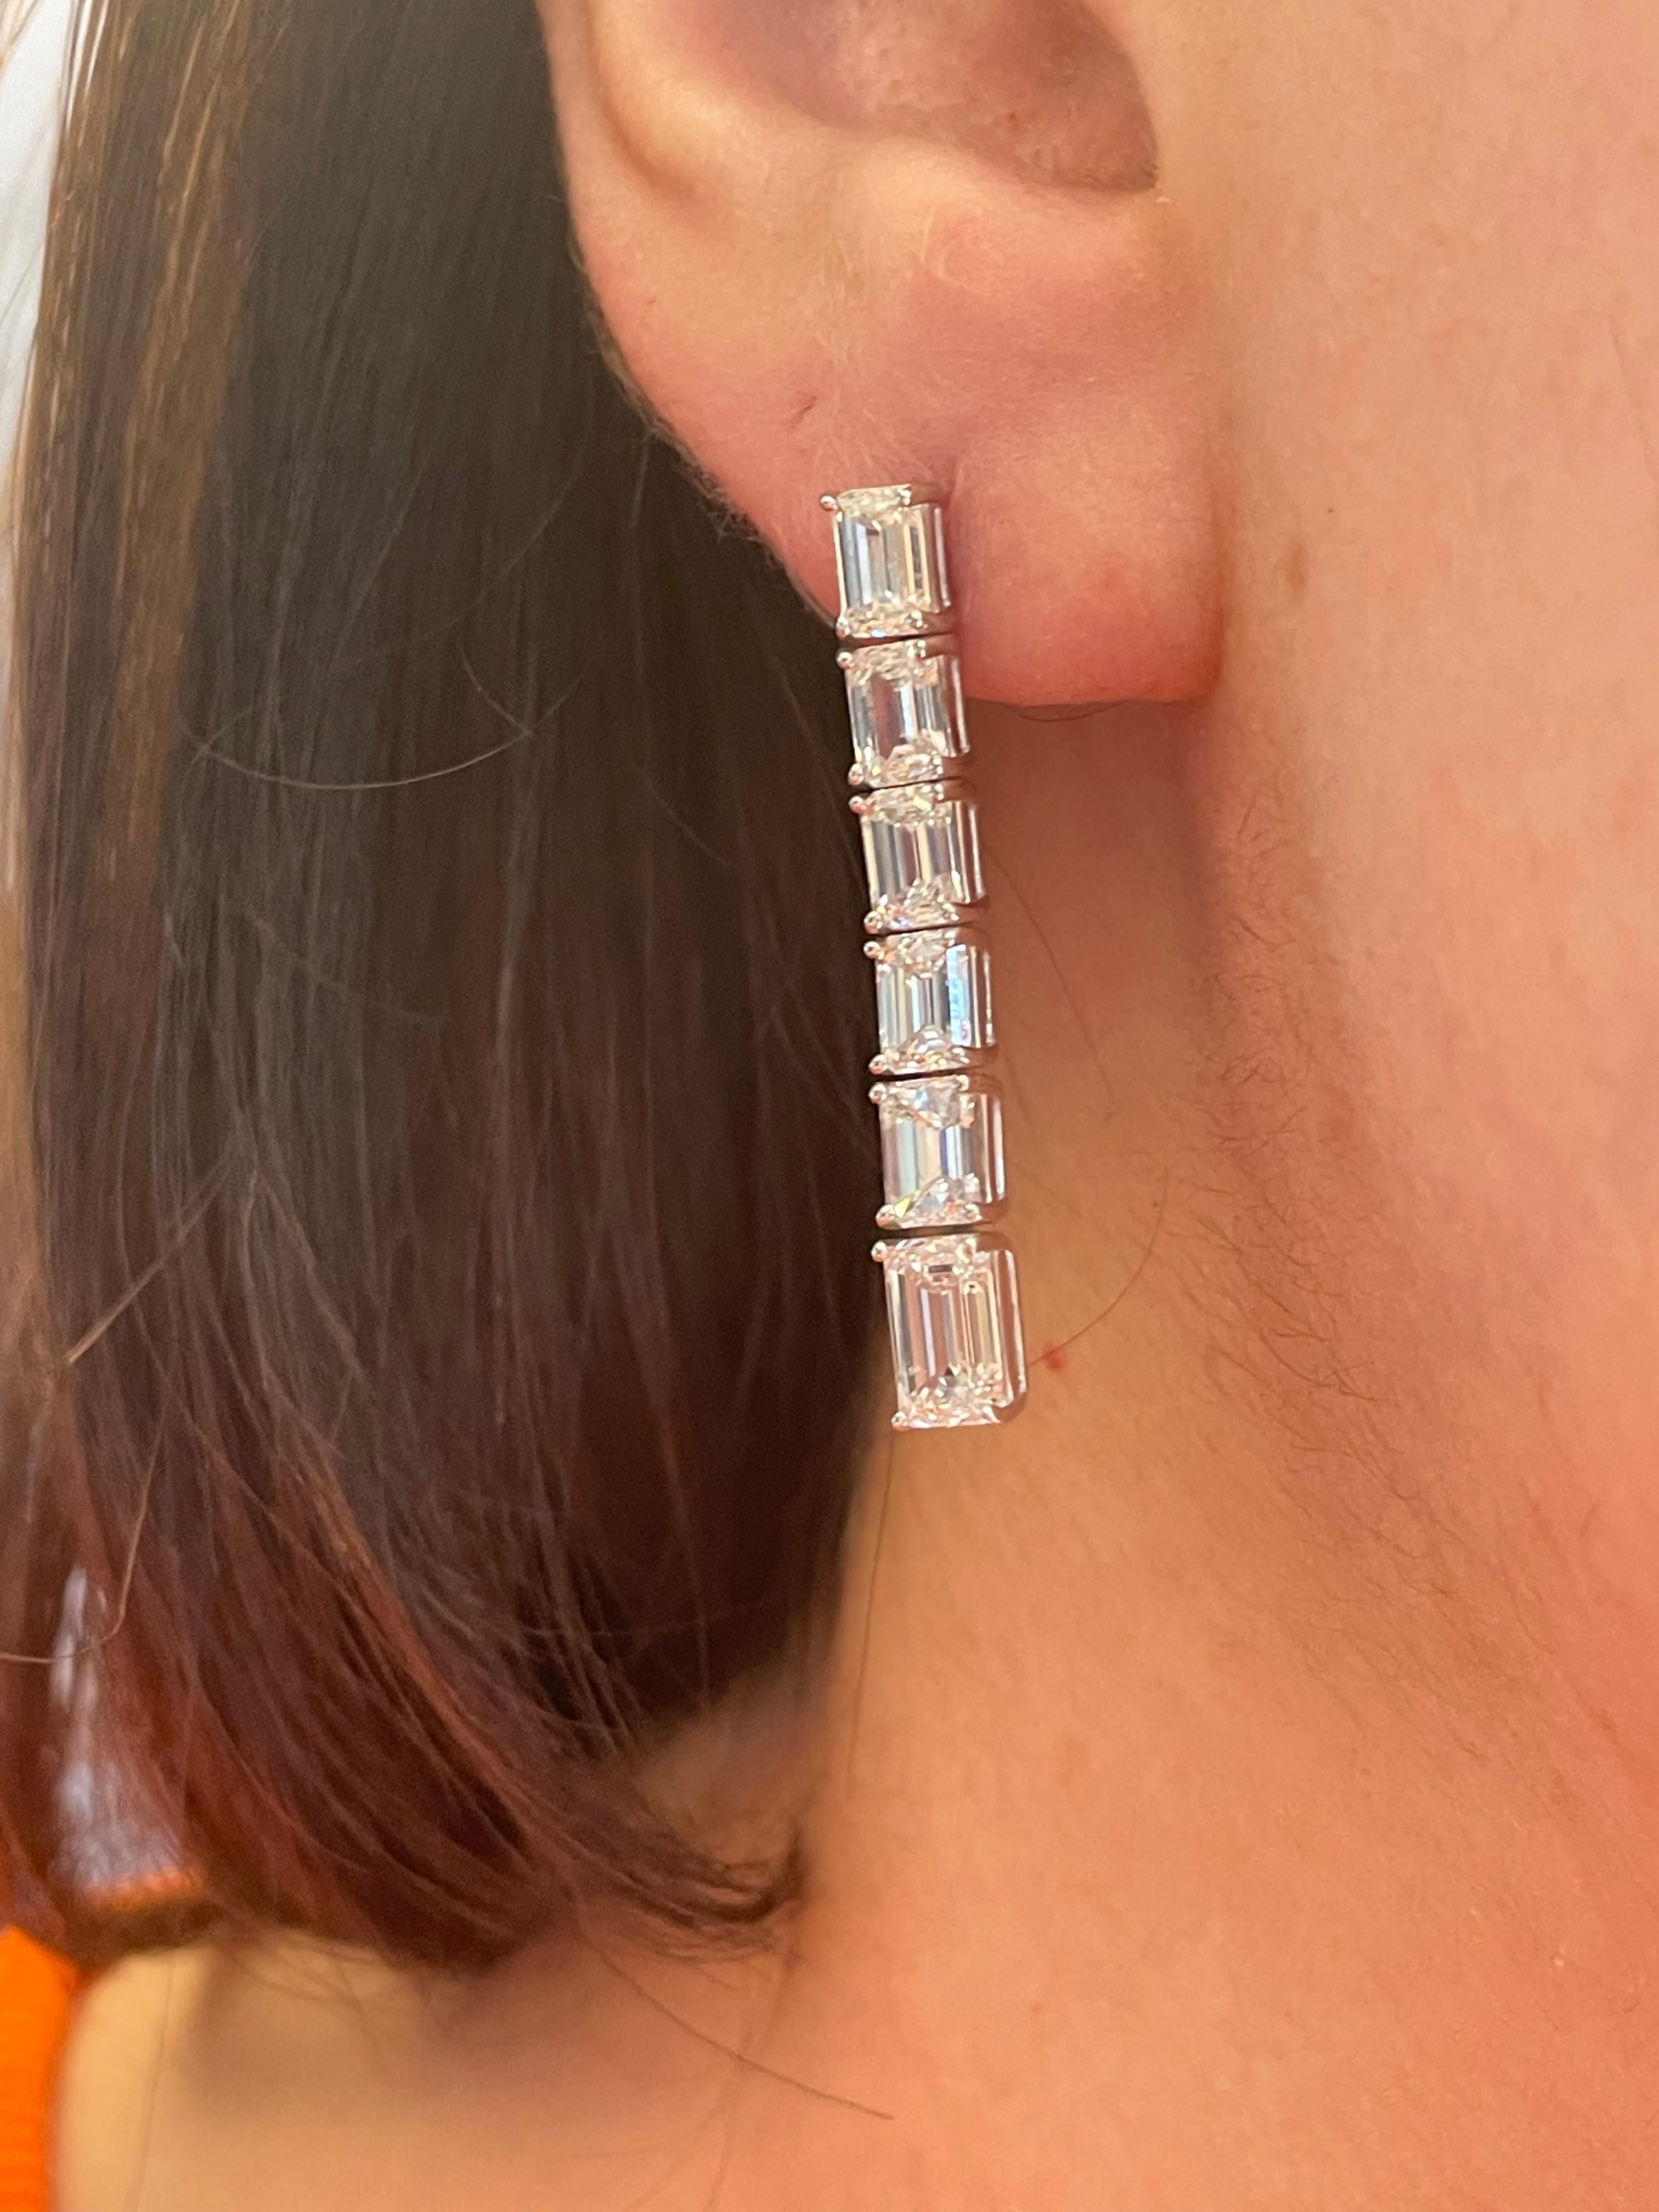 Stunning dangling diamond earring, GIA certified. By Alexander Beverly Hills.
5.33 carats total diamond weight.
Bottom/center 2 emerald cut diamonds, 1.44 carats. Approximately H/I color and VS clarity. 10 emerald cut diamonds, 3.89 carats.